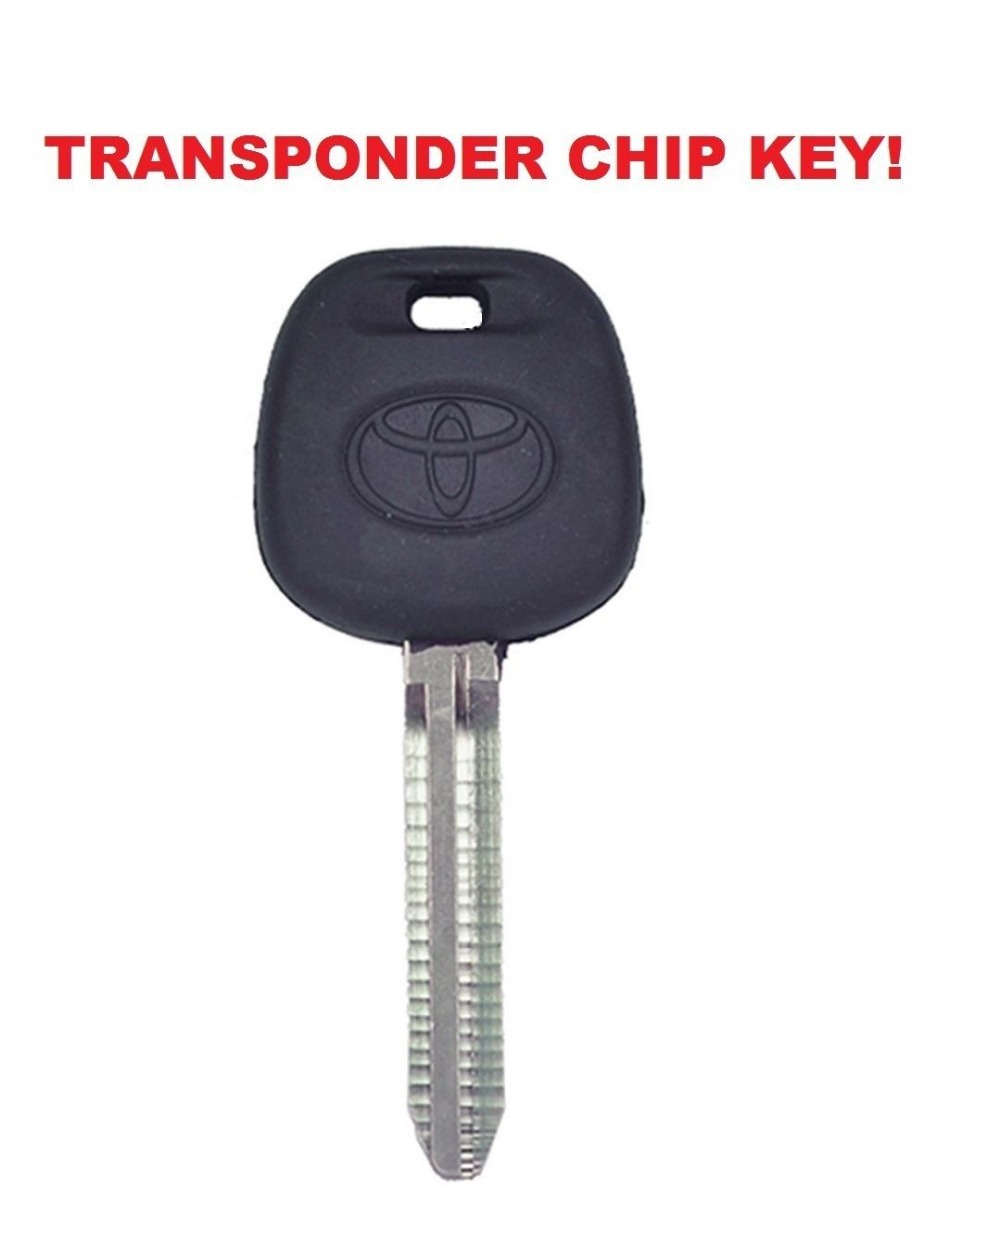 NEW Replacement Transponder Key Ignition WIth Chip 4D67 for TOYOTA CAMRY AVALON SIENNA Uncut Blank TOY43 Blade